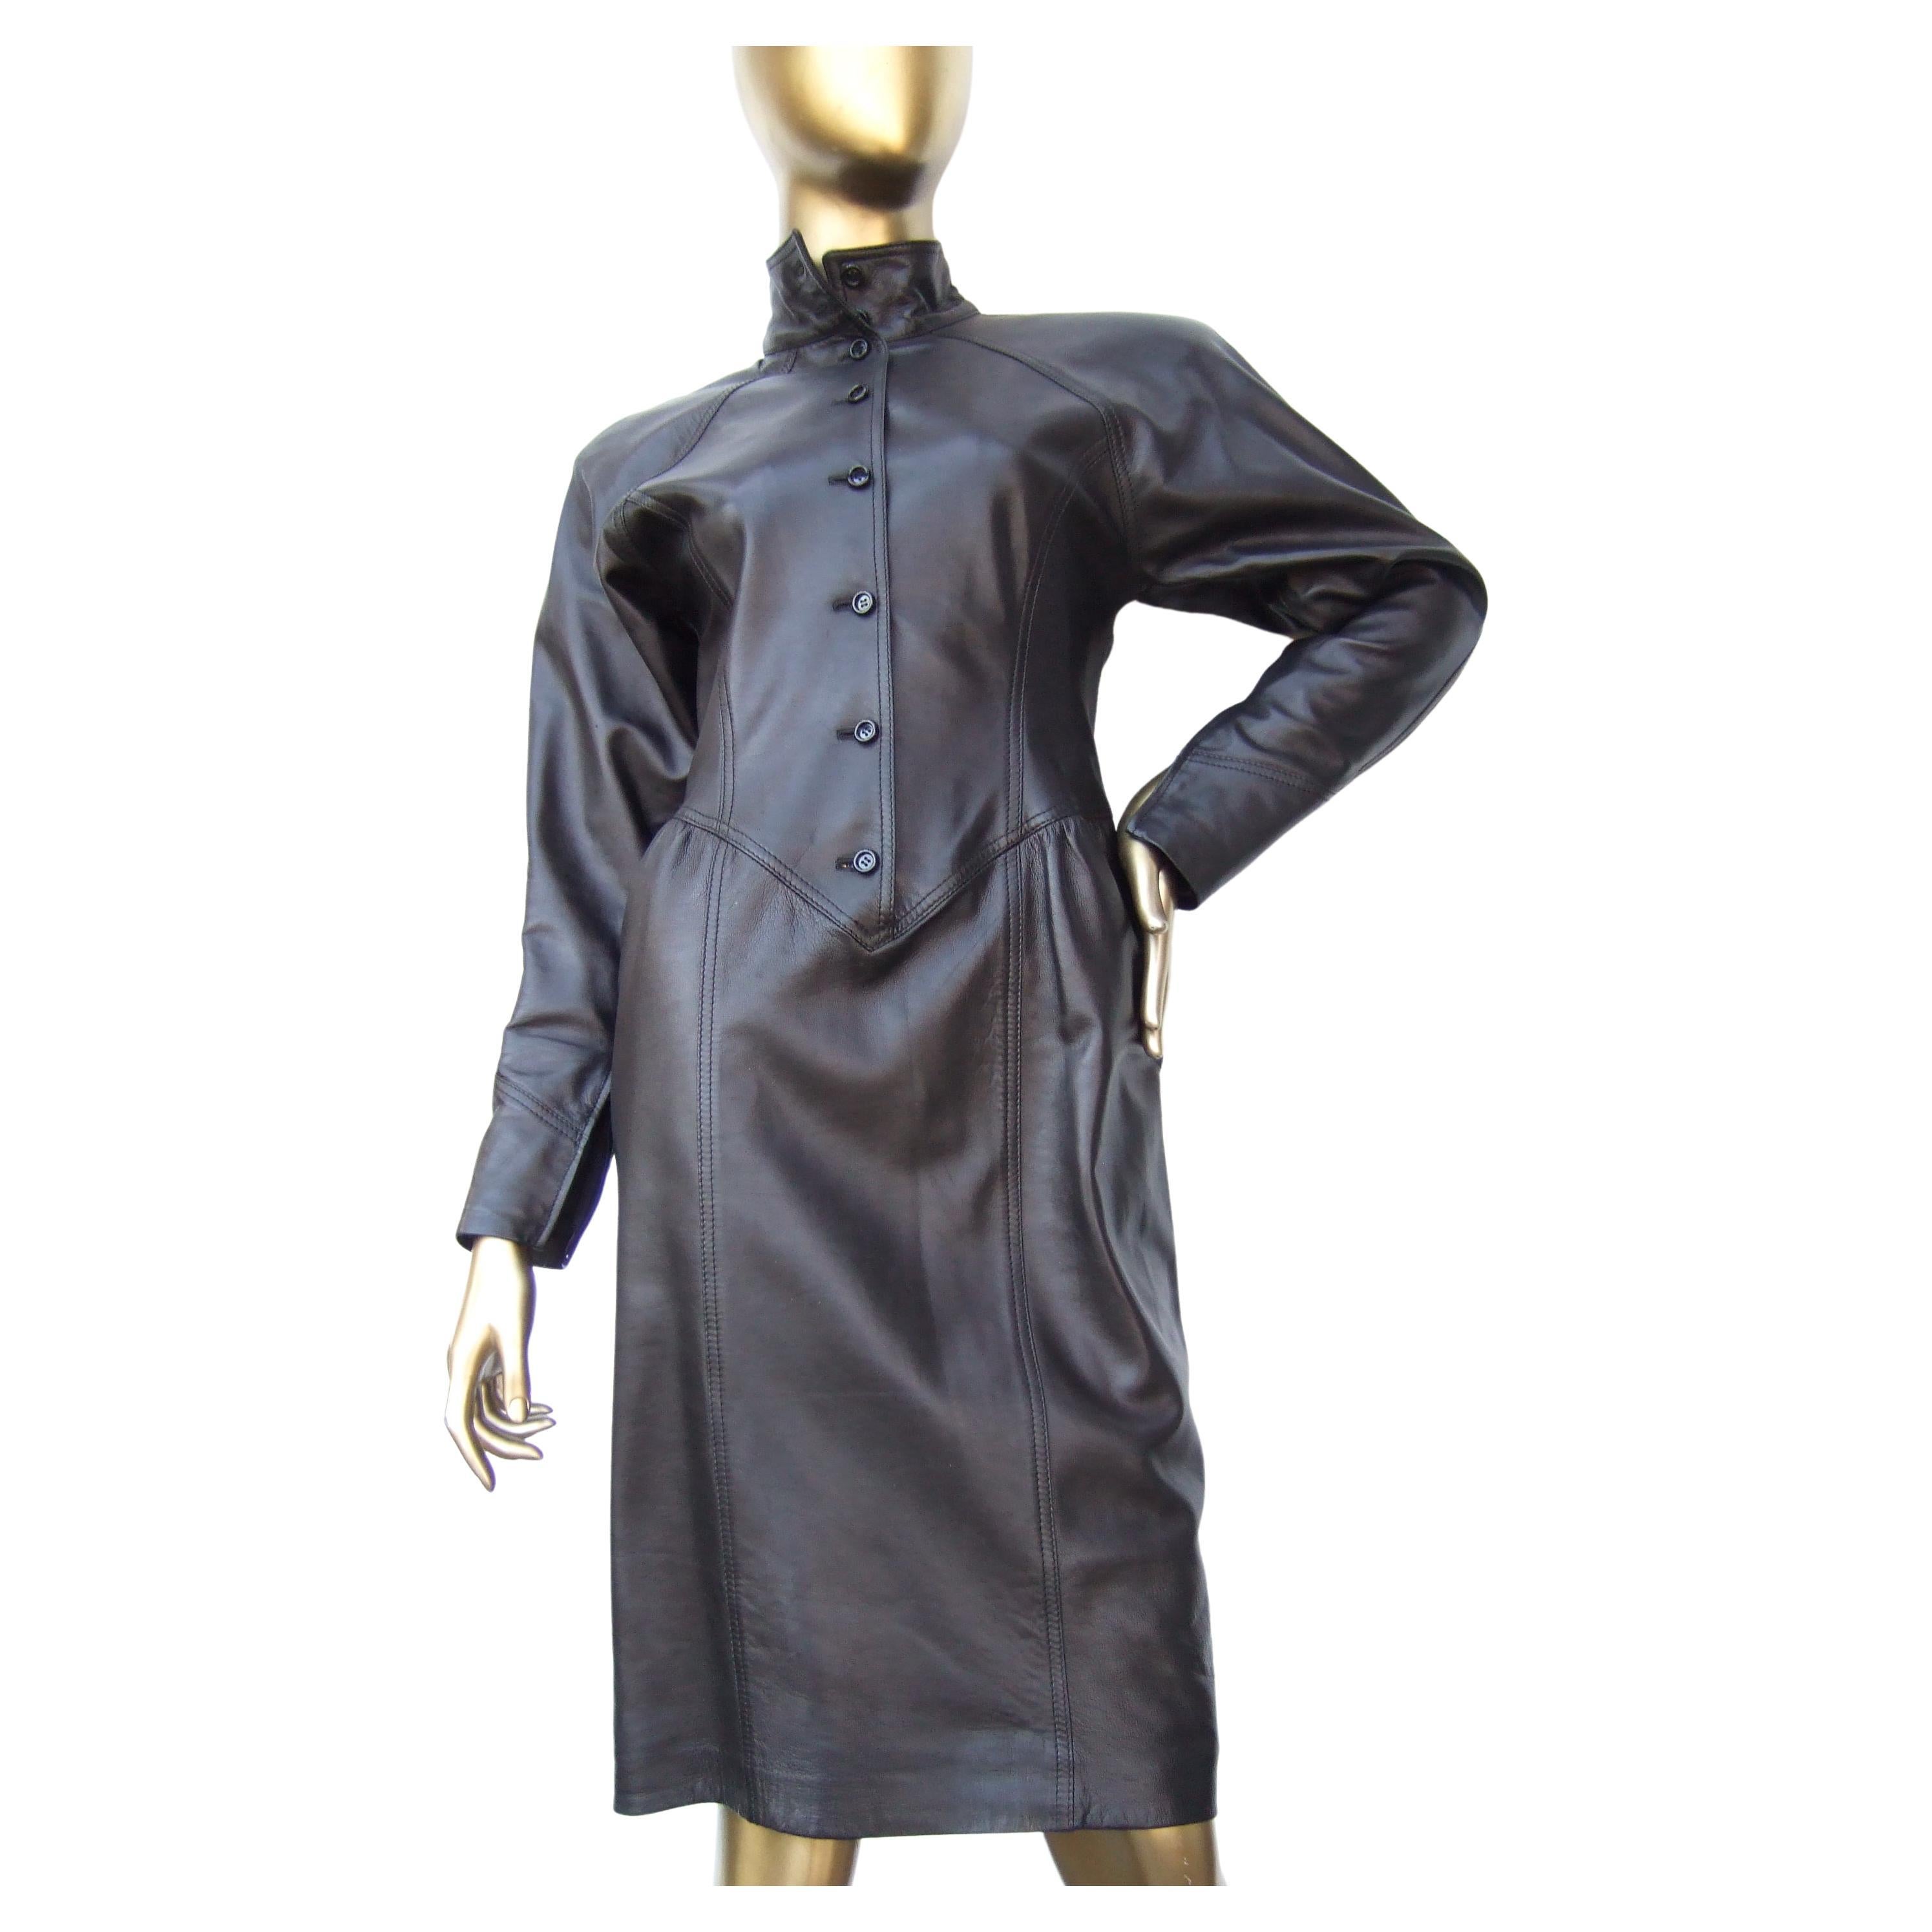 Emanuel Ungaro Paris Avant-garde Edgy Brown Leather Dress Made in Italy c 1980s For Sale